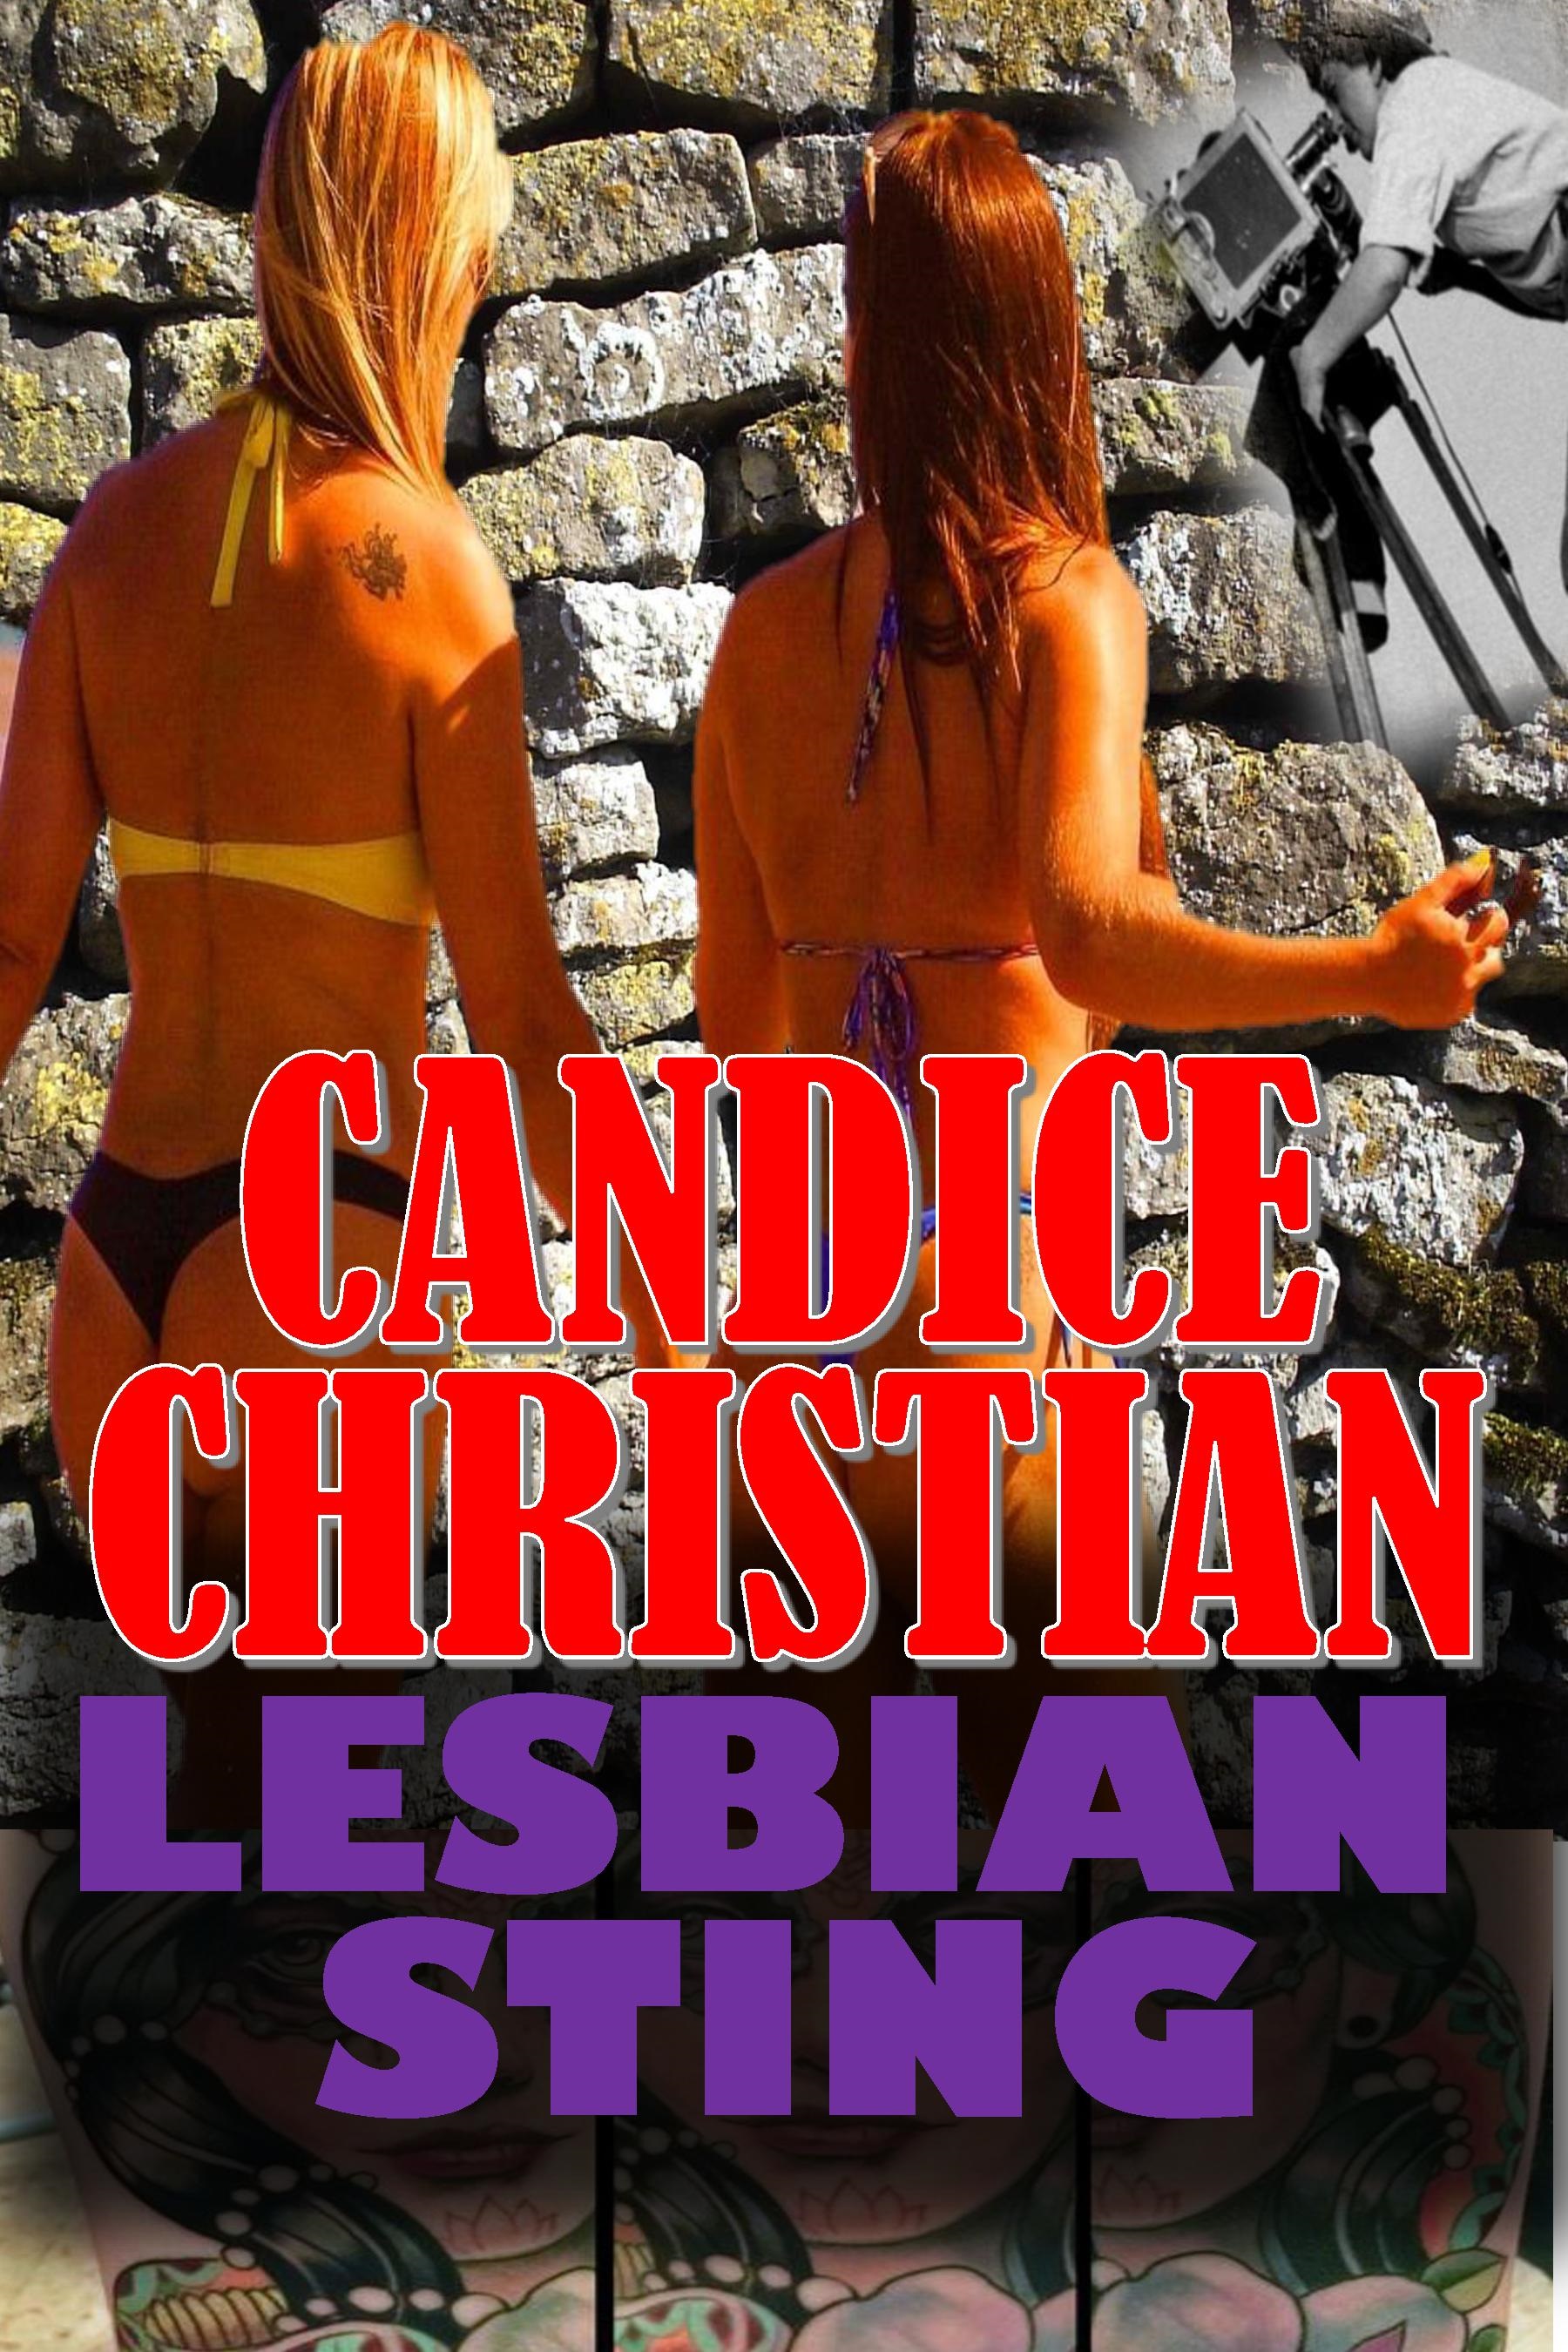 Lesbian Book Covers - Lesbian Sting, an Ebook by Candice Christian